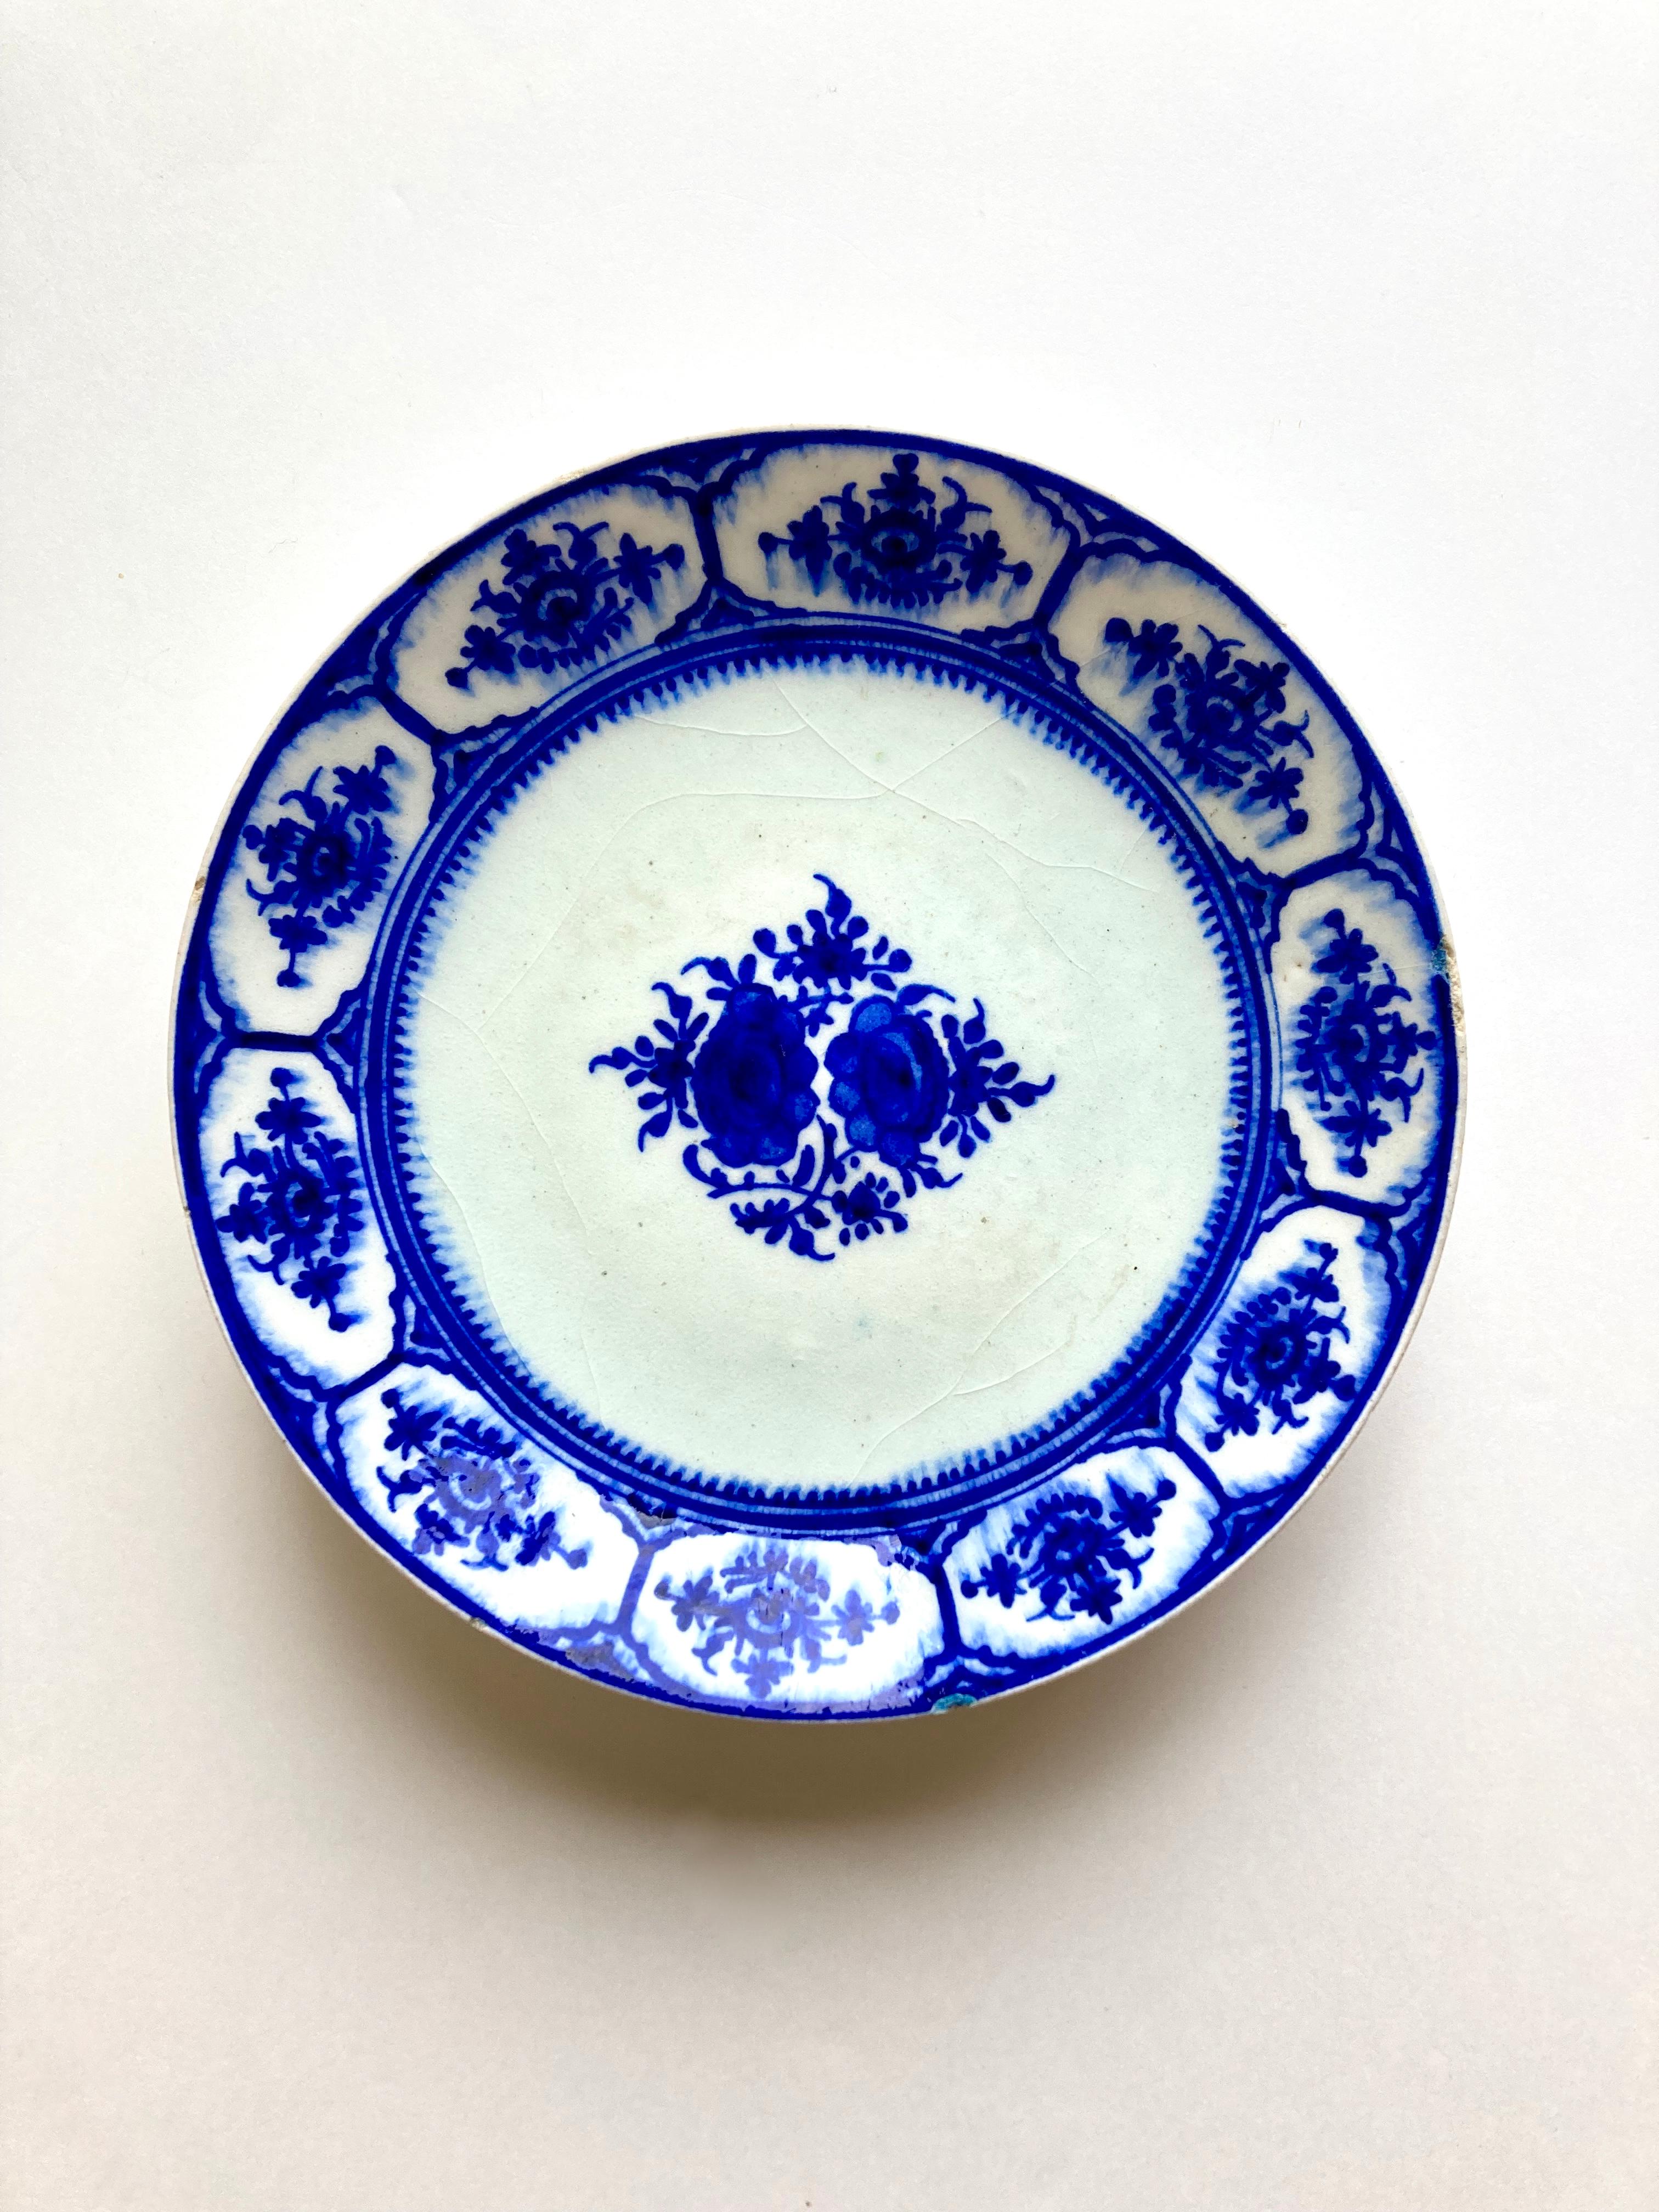 A mysterious, antique blue and white pottery plate. This is a fritware plate, hand-painted with a floral motif in underglaze cobalt blue, possibly an imitation of a Chinese or even an European/Delft composition. 

Although the exact origine of